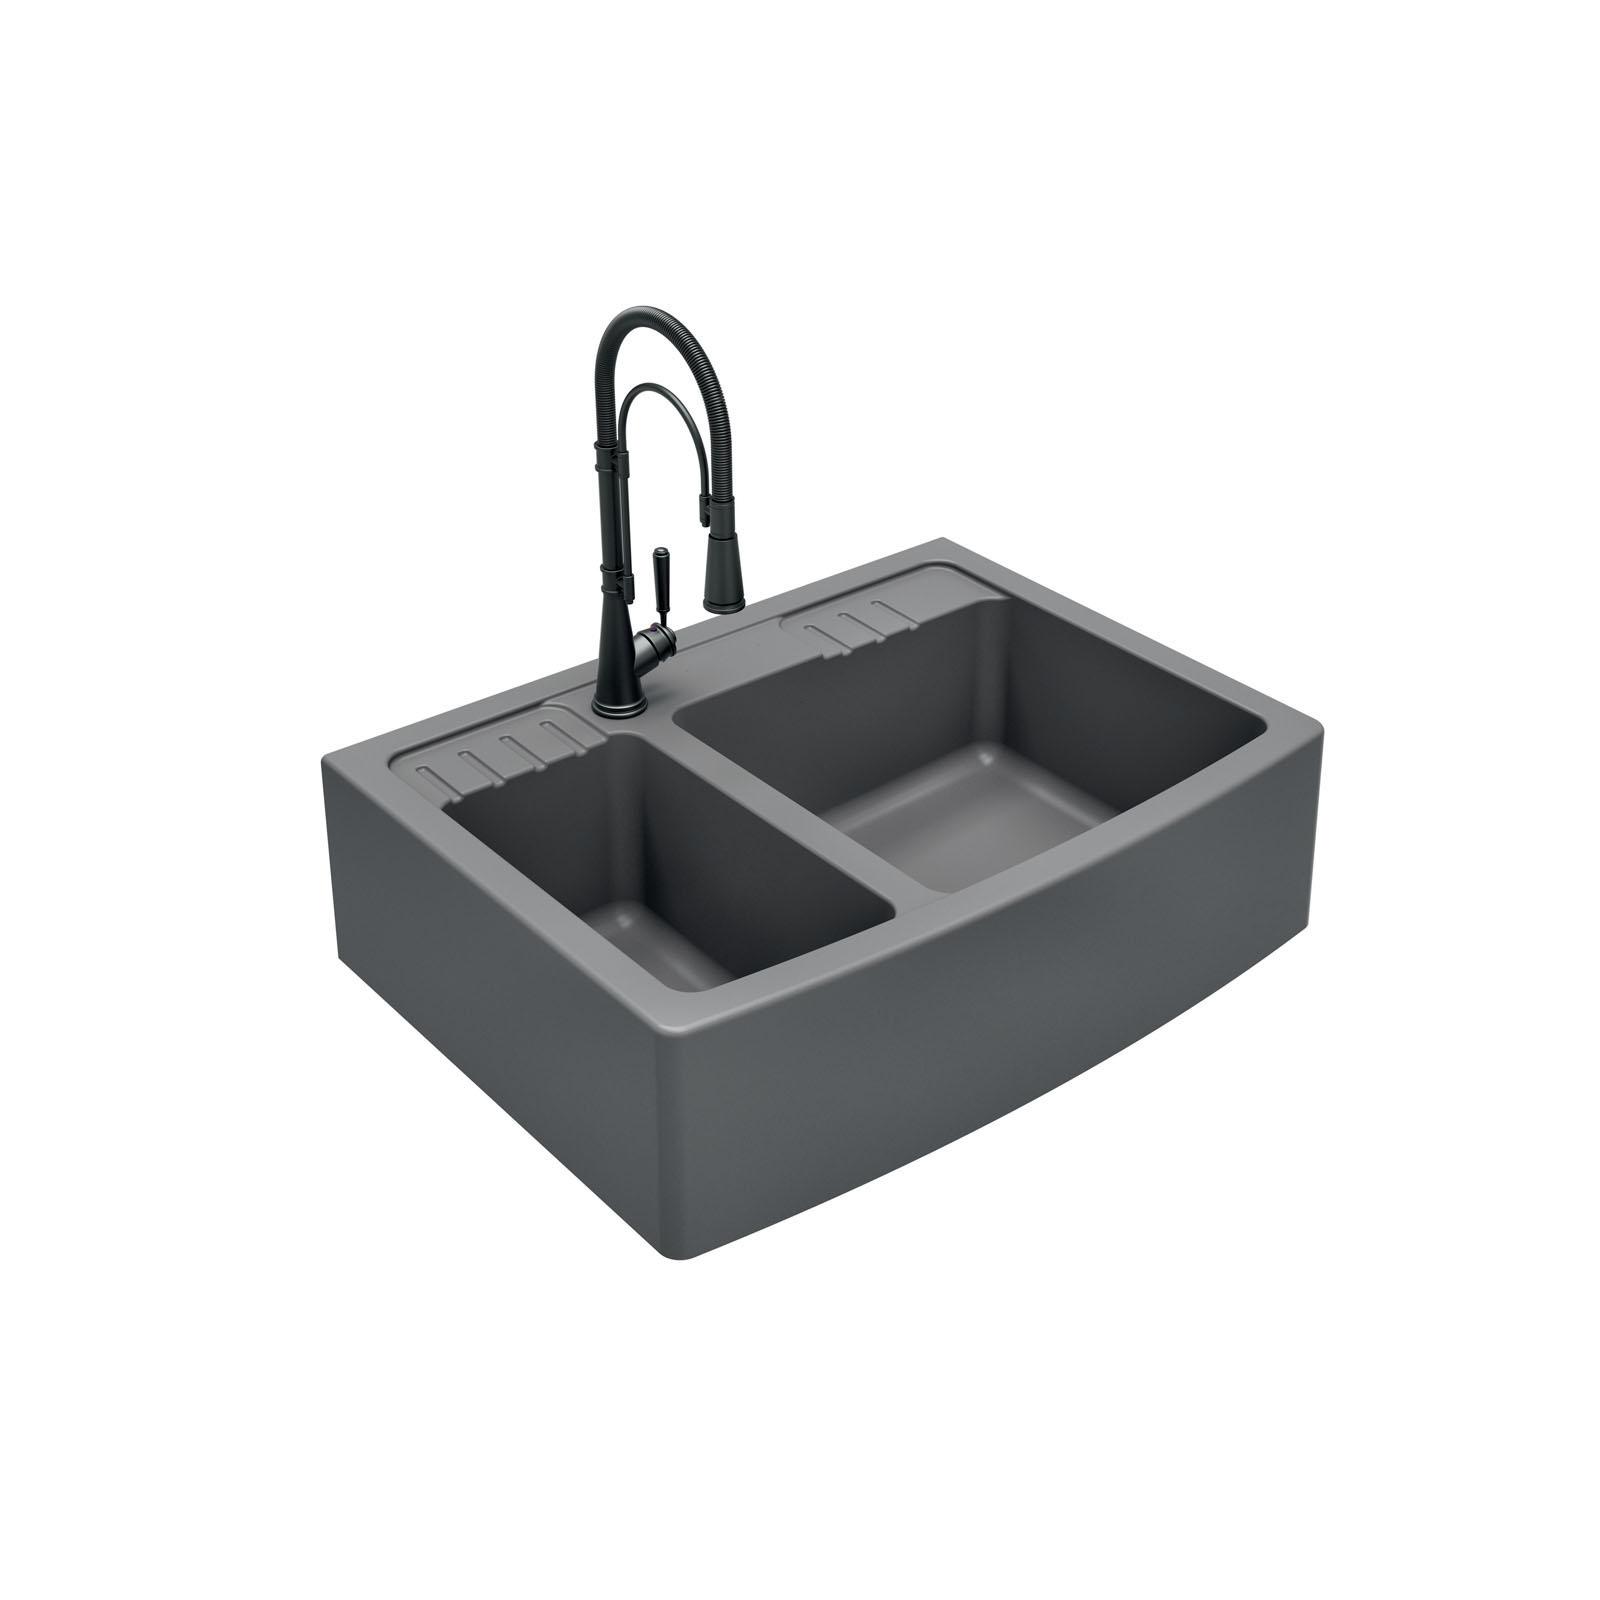 High-quality sink Clotaire III granit titanium - one and a half bowl - ambience 2